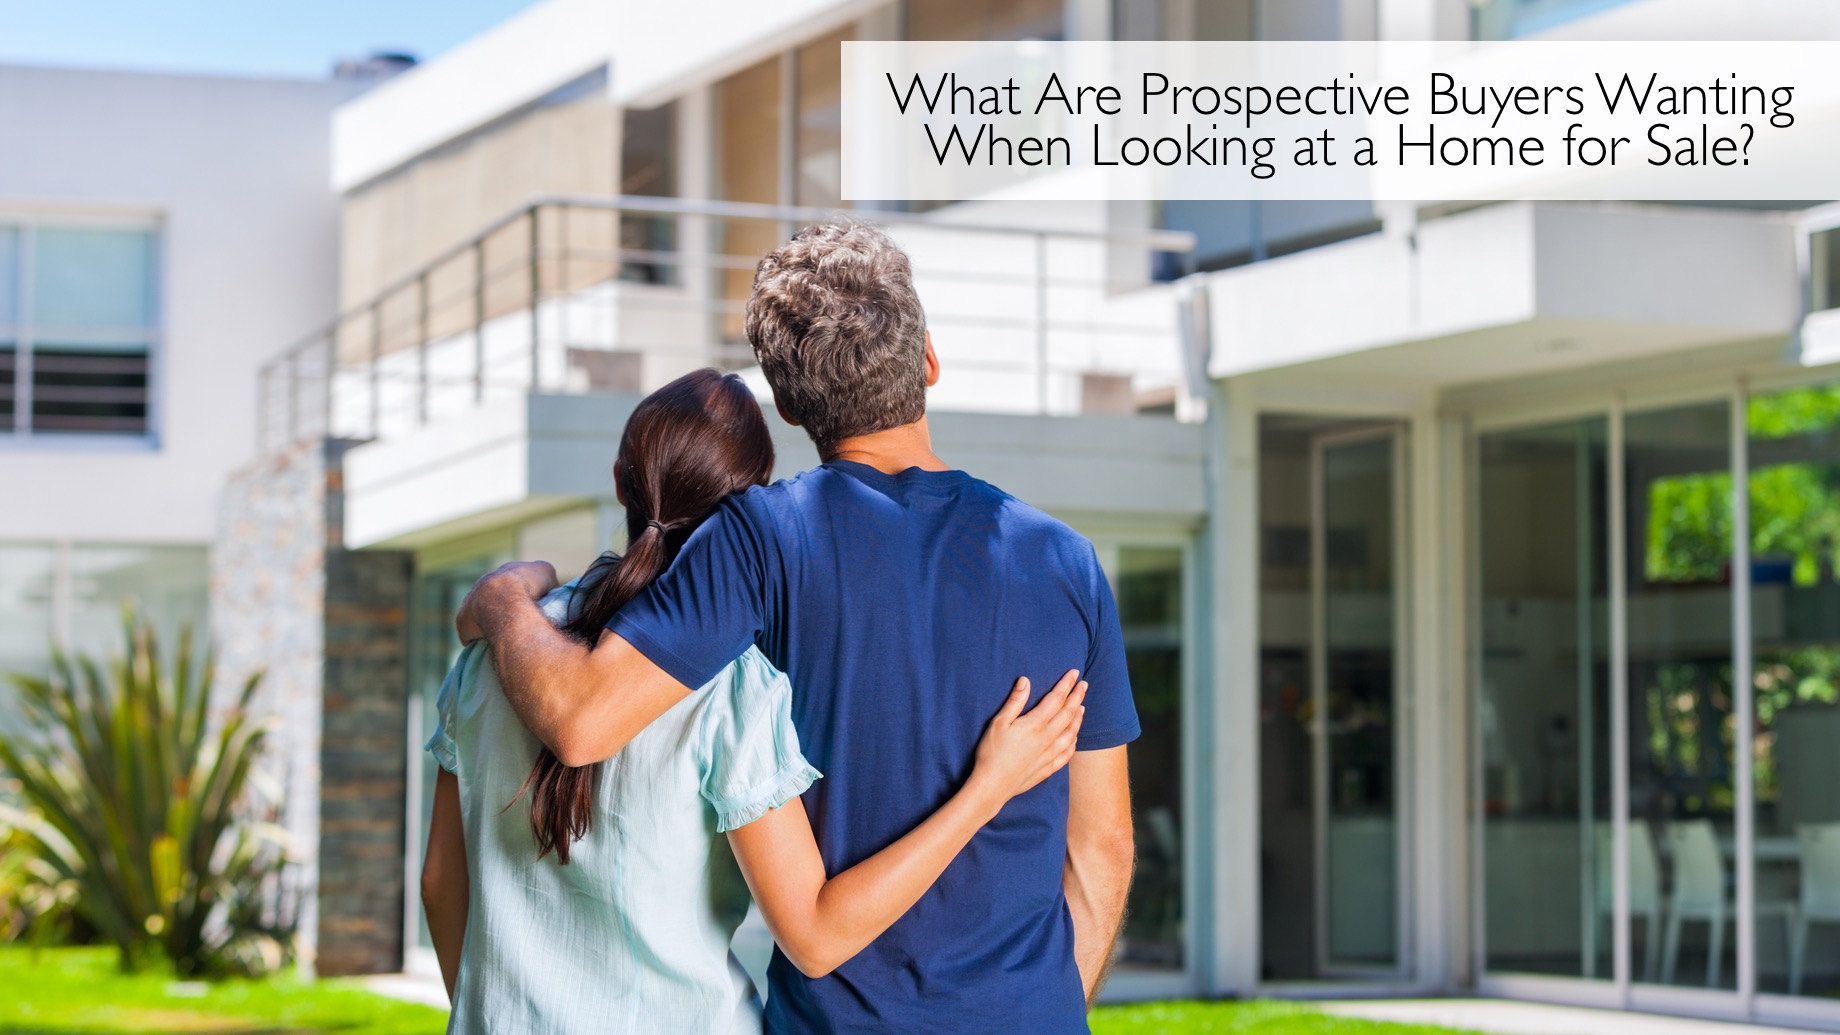 What Are Prospective Buyers Wanting When Looking at a Home for Sale?